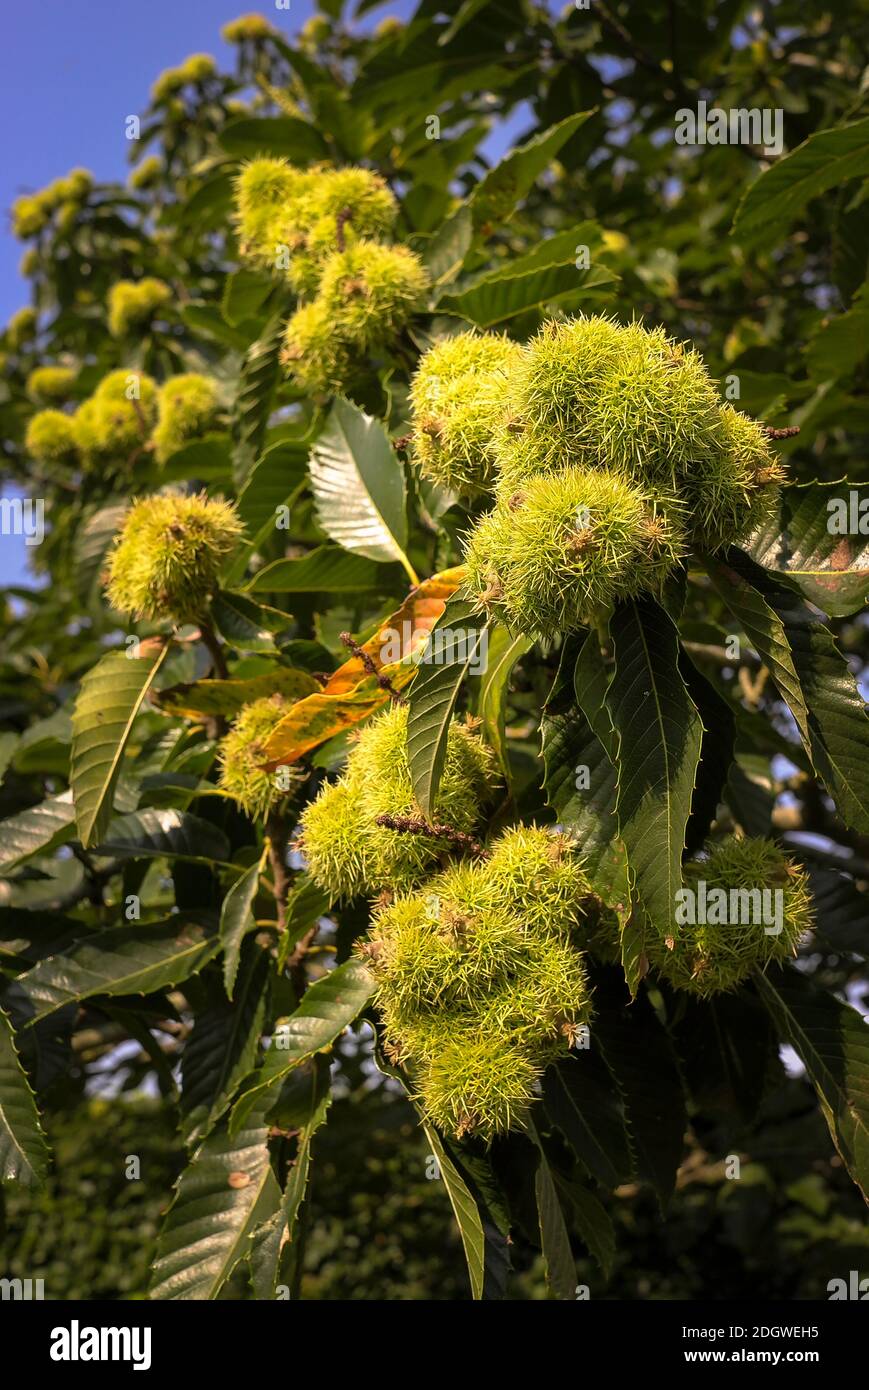 Maturing nuts on a sweet chestnut tree in an English garden in August showing spines on nut cases Stock Photo